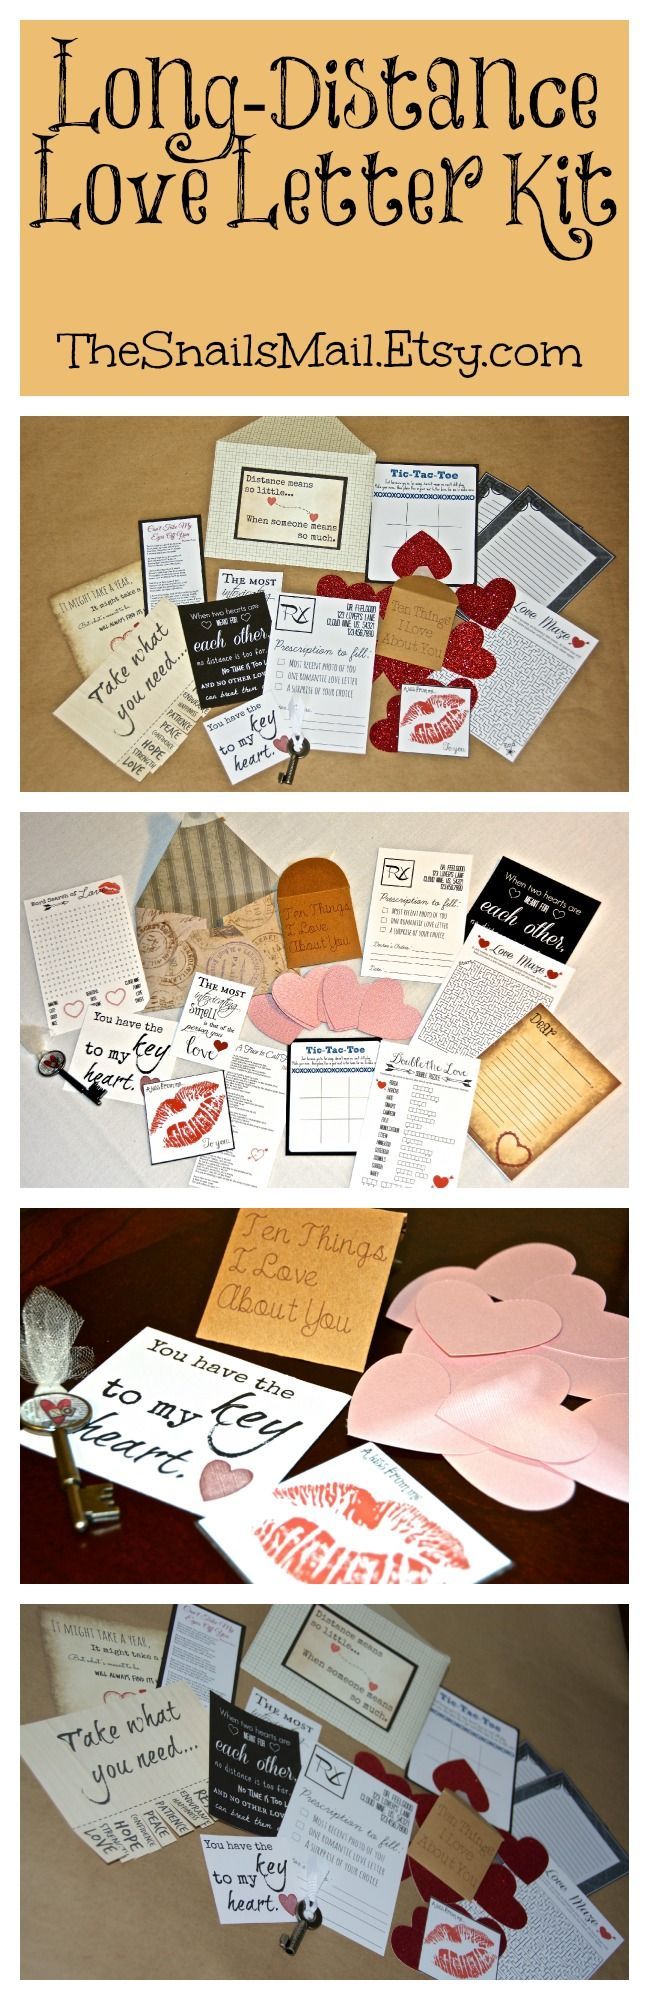 A Long-Distance Relationship Love Letter Kit. Perfect for that special someone you can’t see every day!